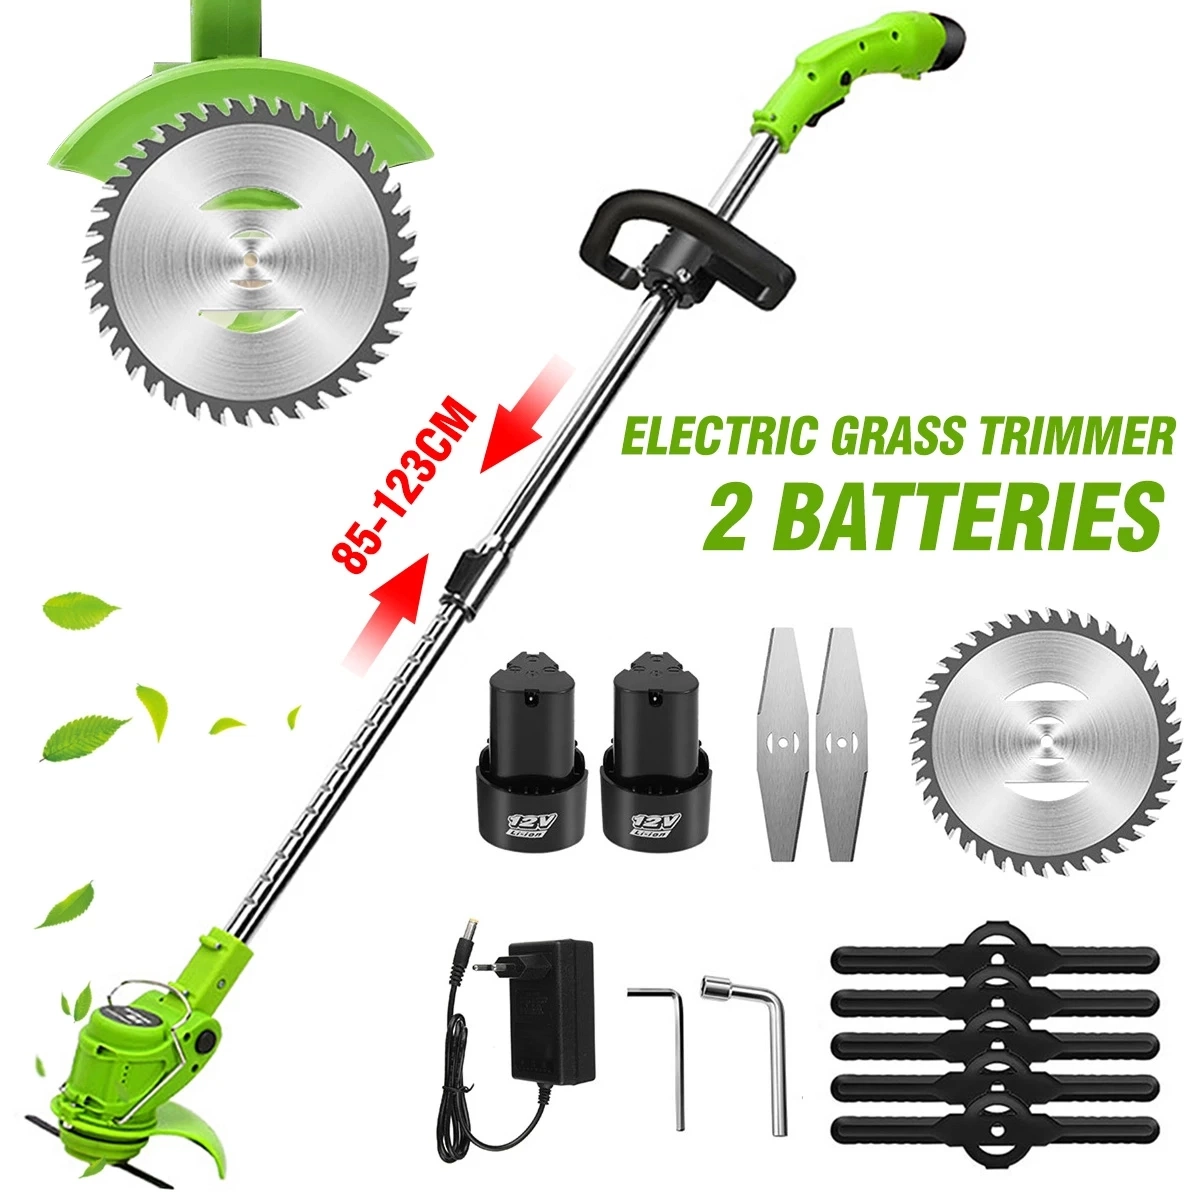 1280W Electric Grass Trimmer Cordless Lawn Mower Hedge Trimmer Adjustable Handheld Garden Power Pruning Machine with 12V Battery